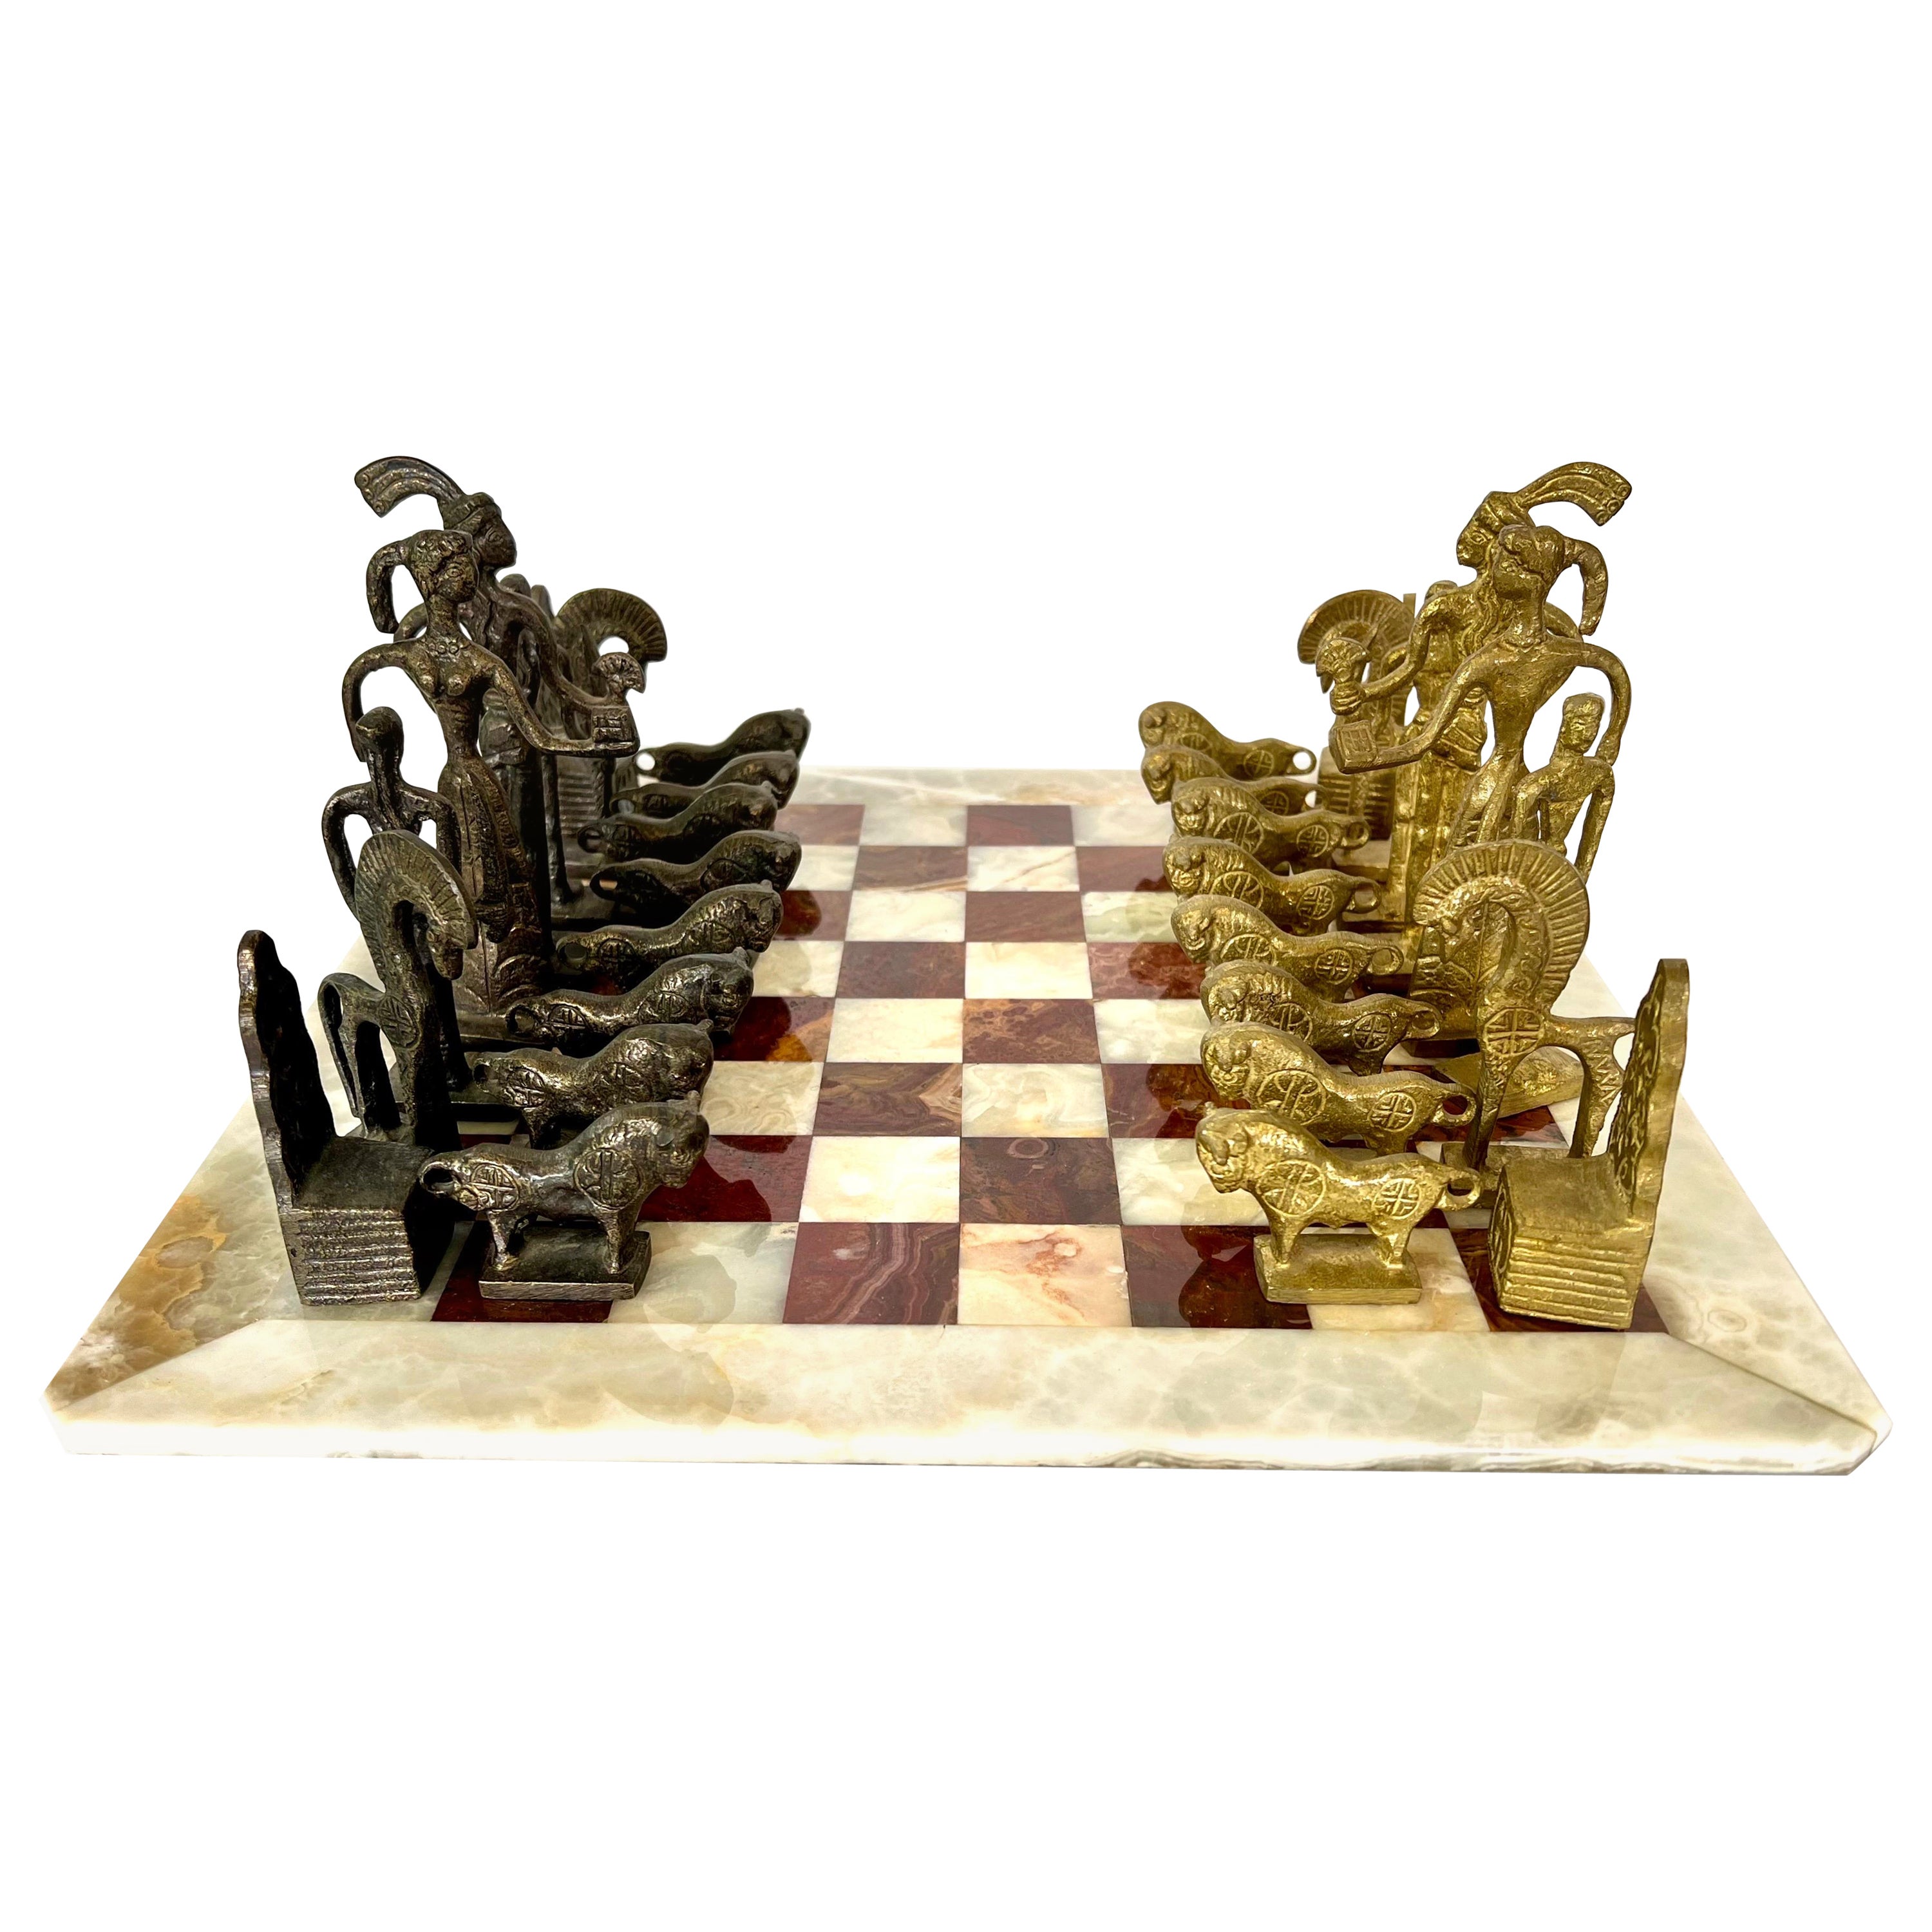 Vintage Marble Chess Set with Brutalist Carved Bronze and Brass Figurines